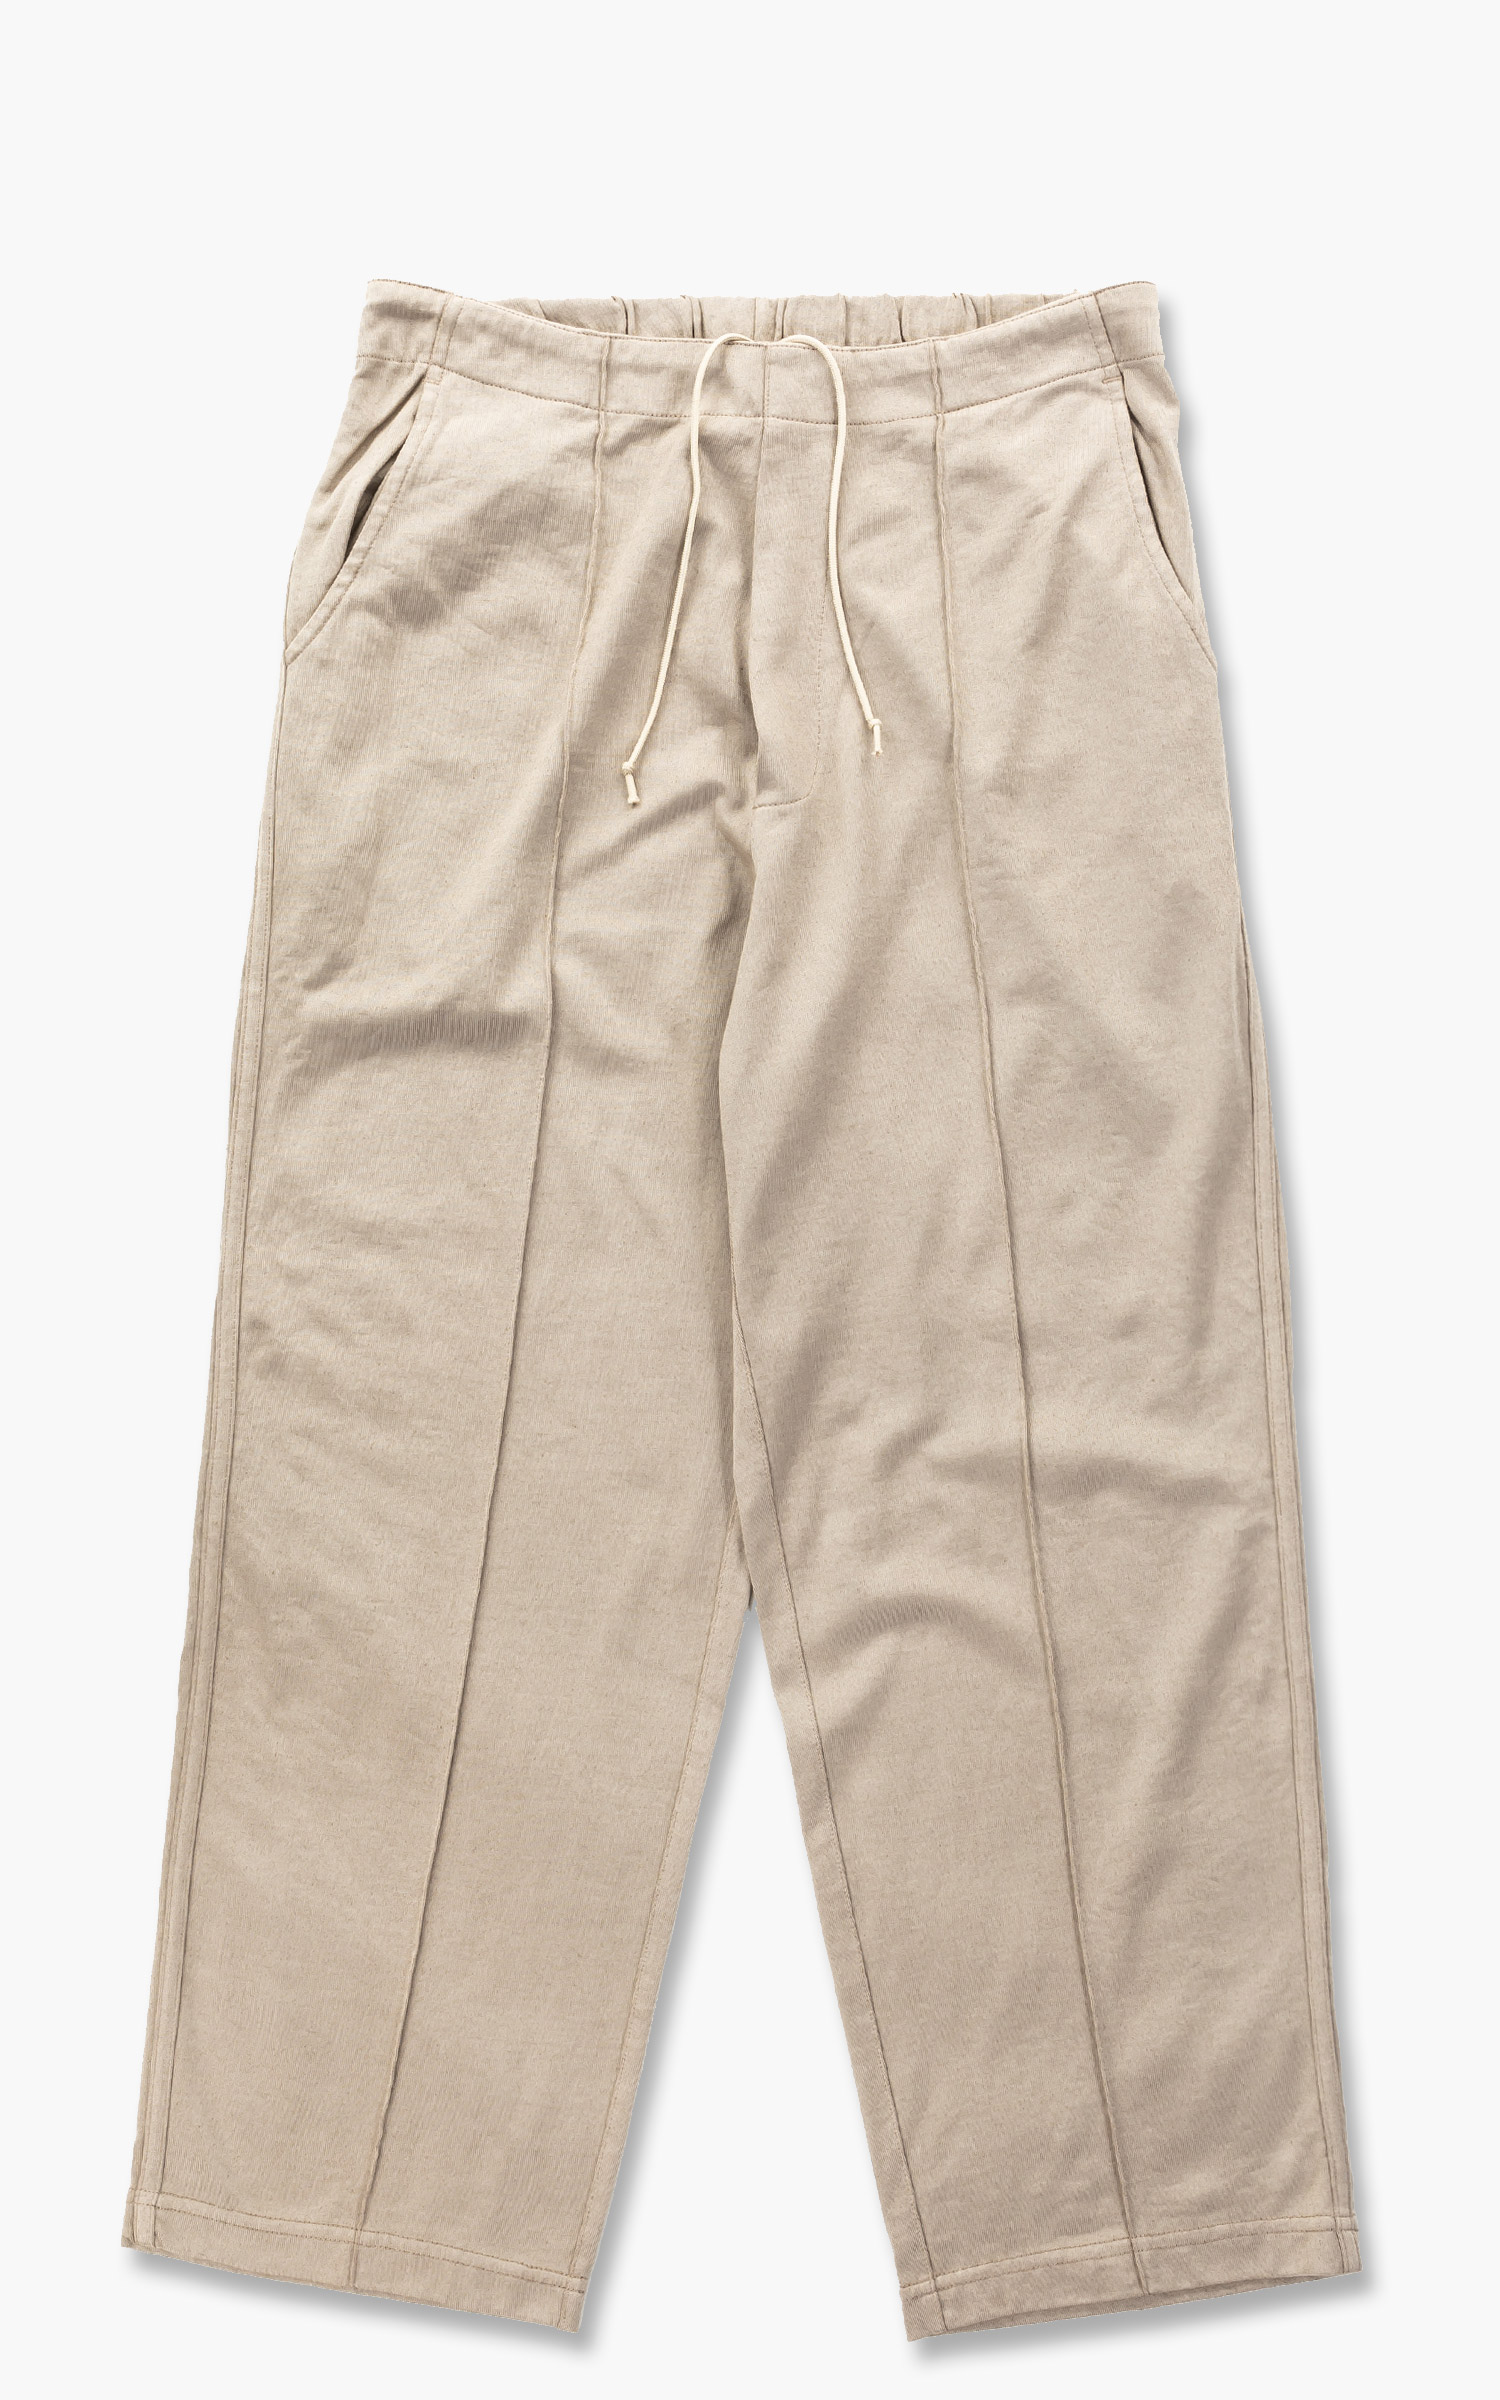 Lady White Co. Band Pant Creampearl